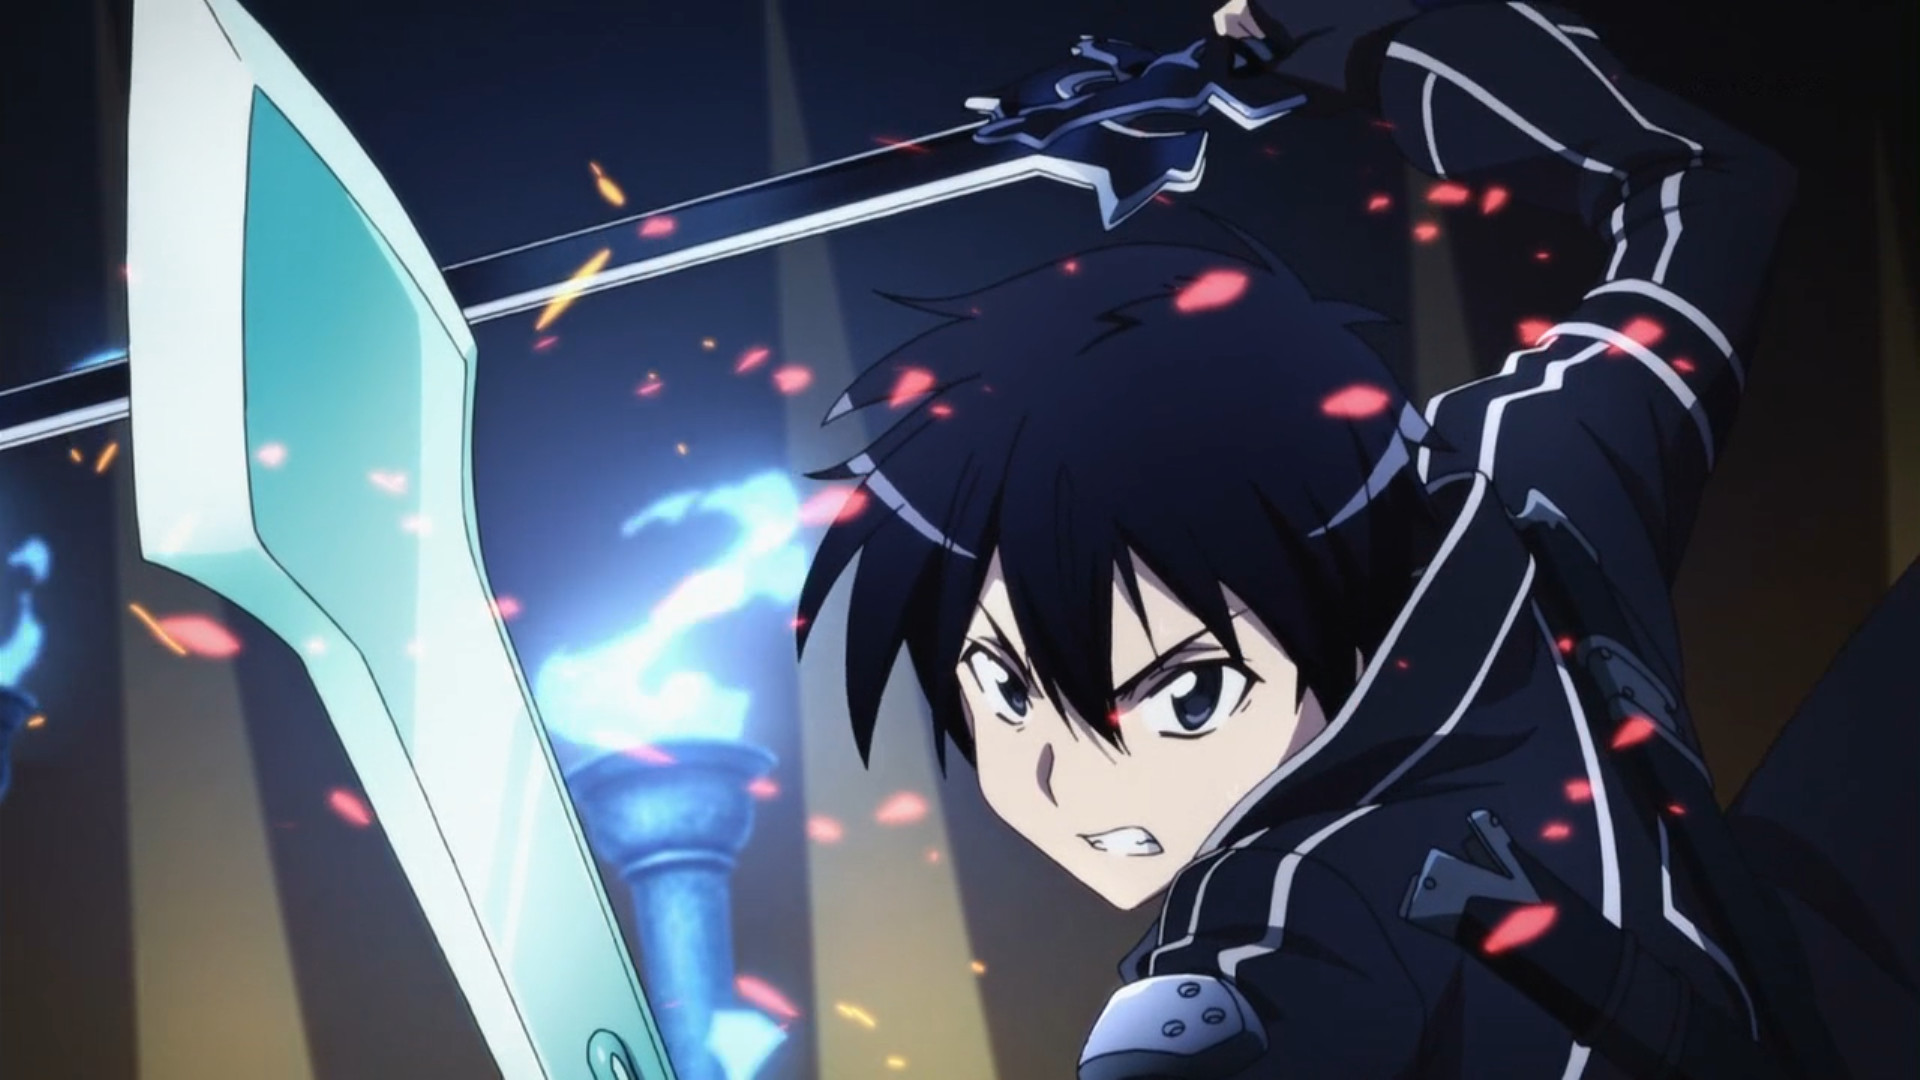 1920x1080 When I look back at Sword Art Online, I see a tragedy. I see a show that  anchored itself to a smart, clever, incredibly compelling idea and then  proceeded ...